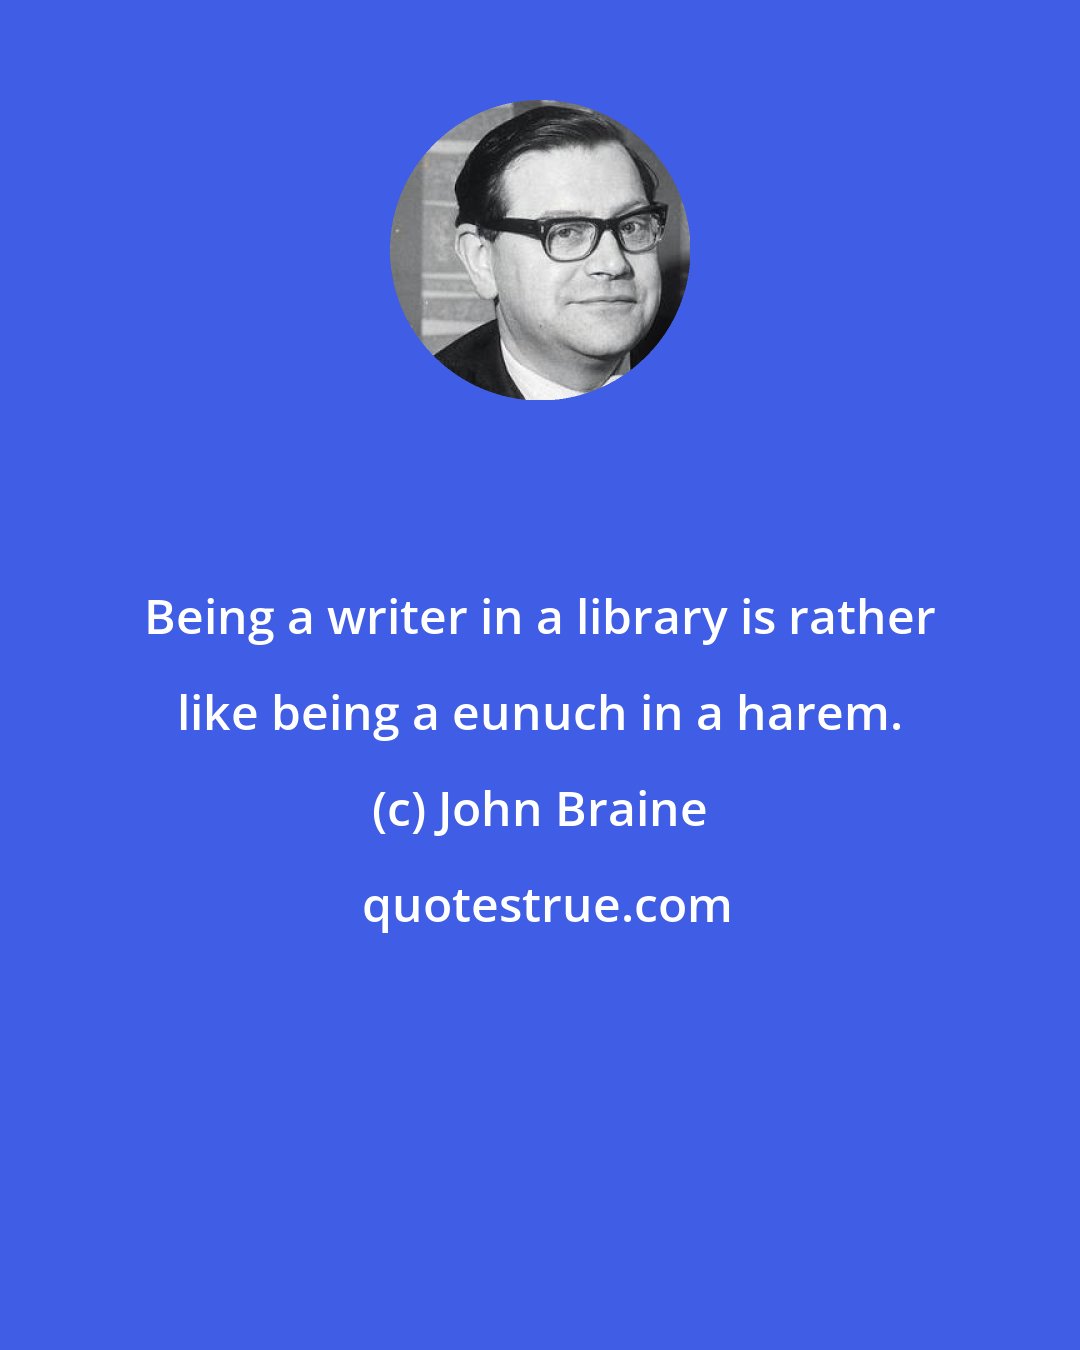 John Braine: Being a writer in a library is rather like being a eunuch in a harem.